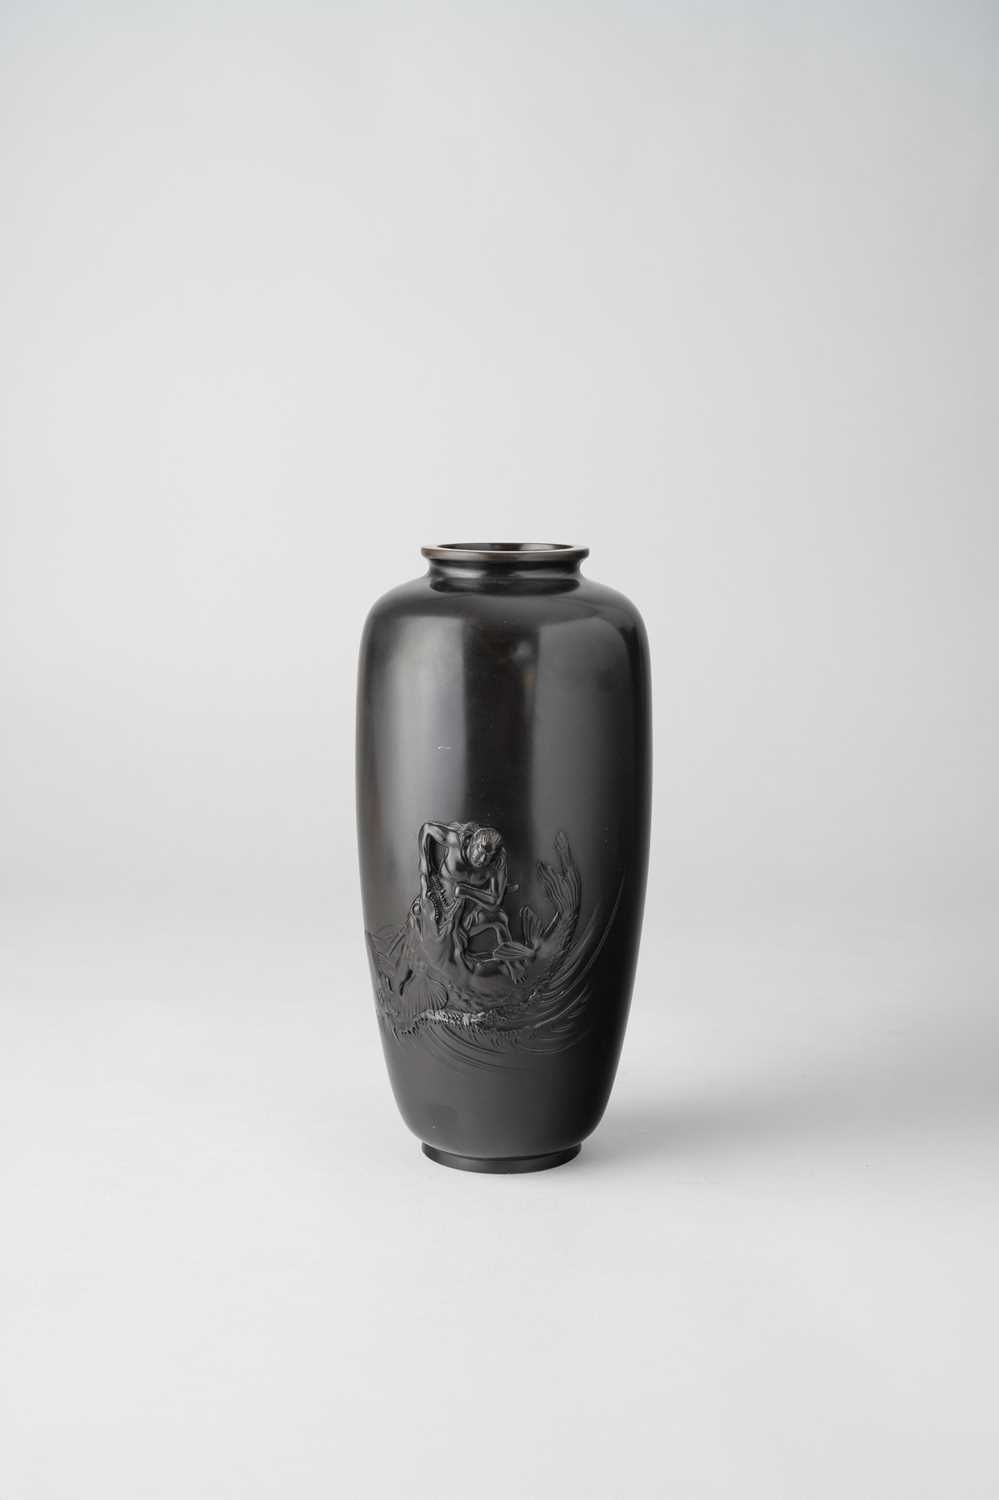 A JAPANESE BRONZE VASE BY MASAYUKI MEIJI ERA, 19TH CENTURY The tall cylindrical body decorated in